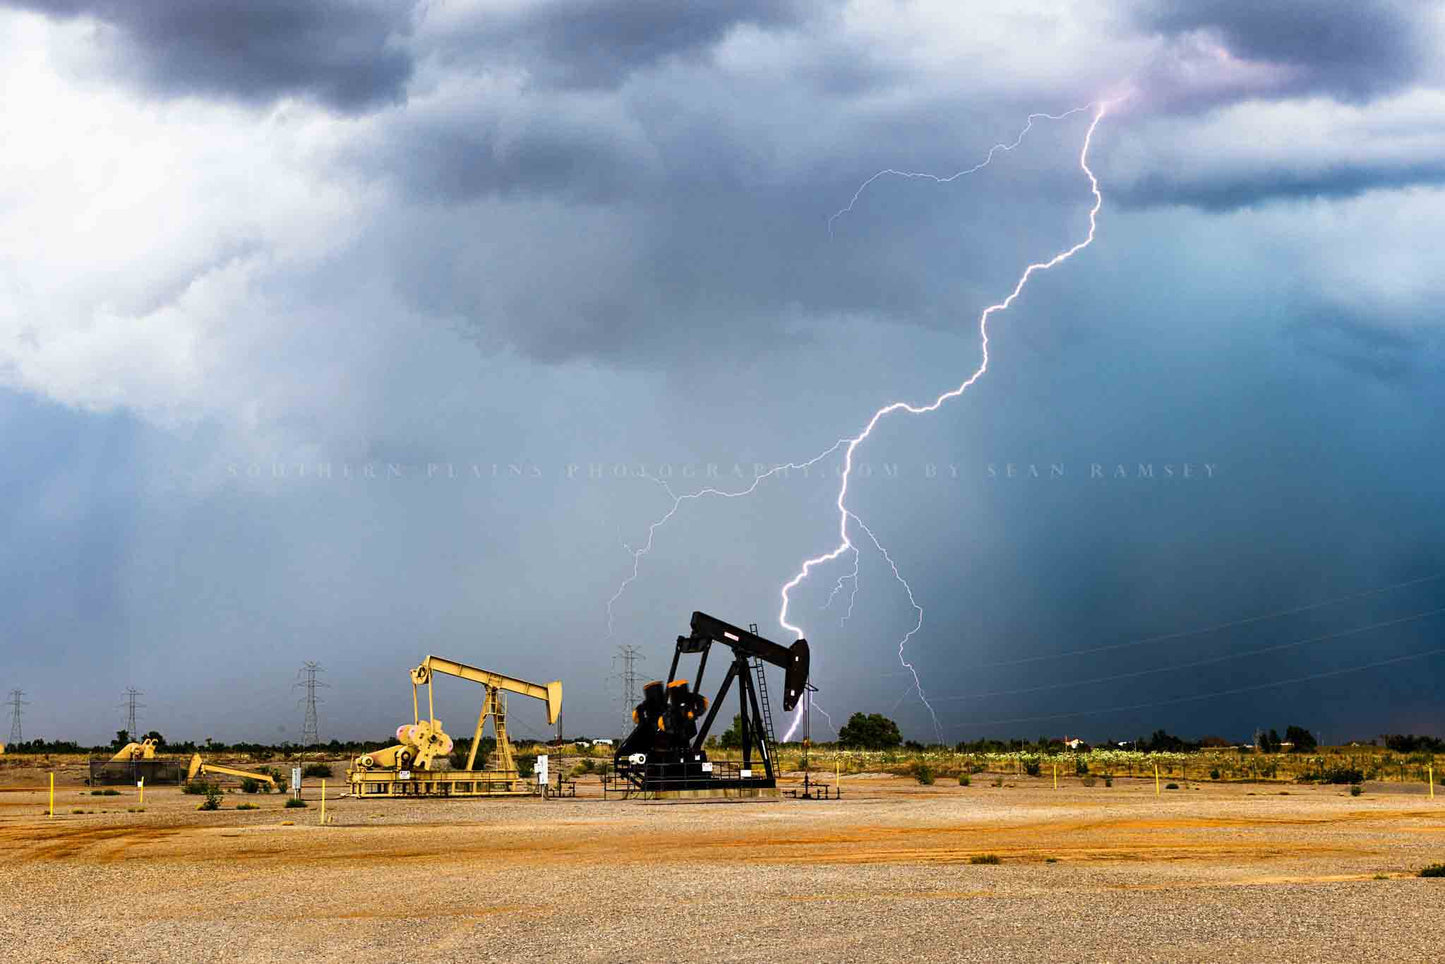 Storm photography print of a lightning bolt behind pump jacks on a stormy summer day on the plains of Oklahoma by Sean Ramsey of Southern Plains Photography.